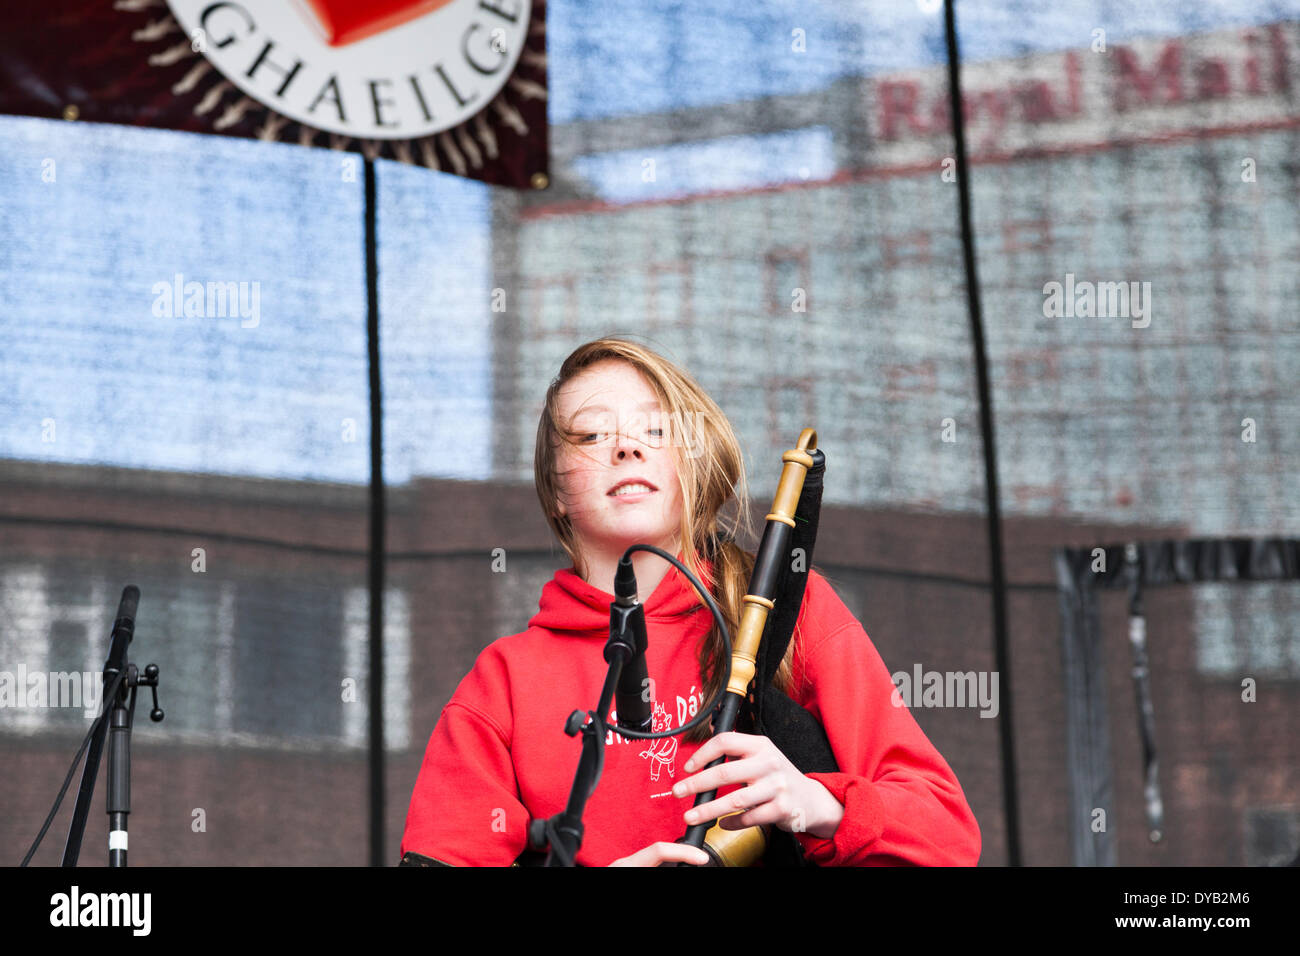 Belfast, Northern Ireland. 12th Apr, 2014. Young lady plays the Irish bagpipes or Uilleann pipes. Rally for the Irish language, Belfast, Northern Ireland Credit:  J Orr/Alamy Live News Stock Photo